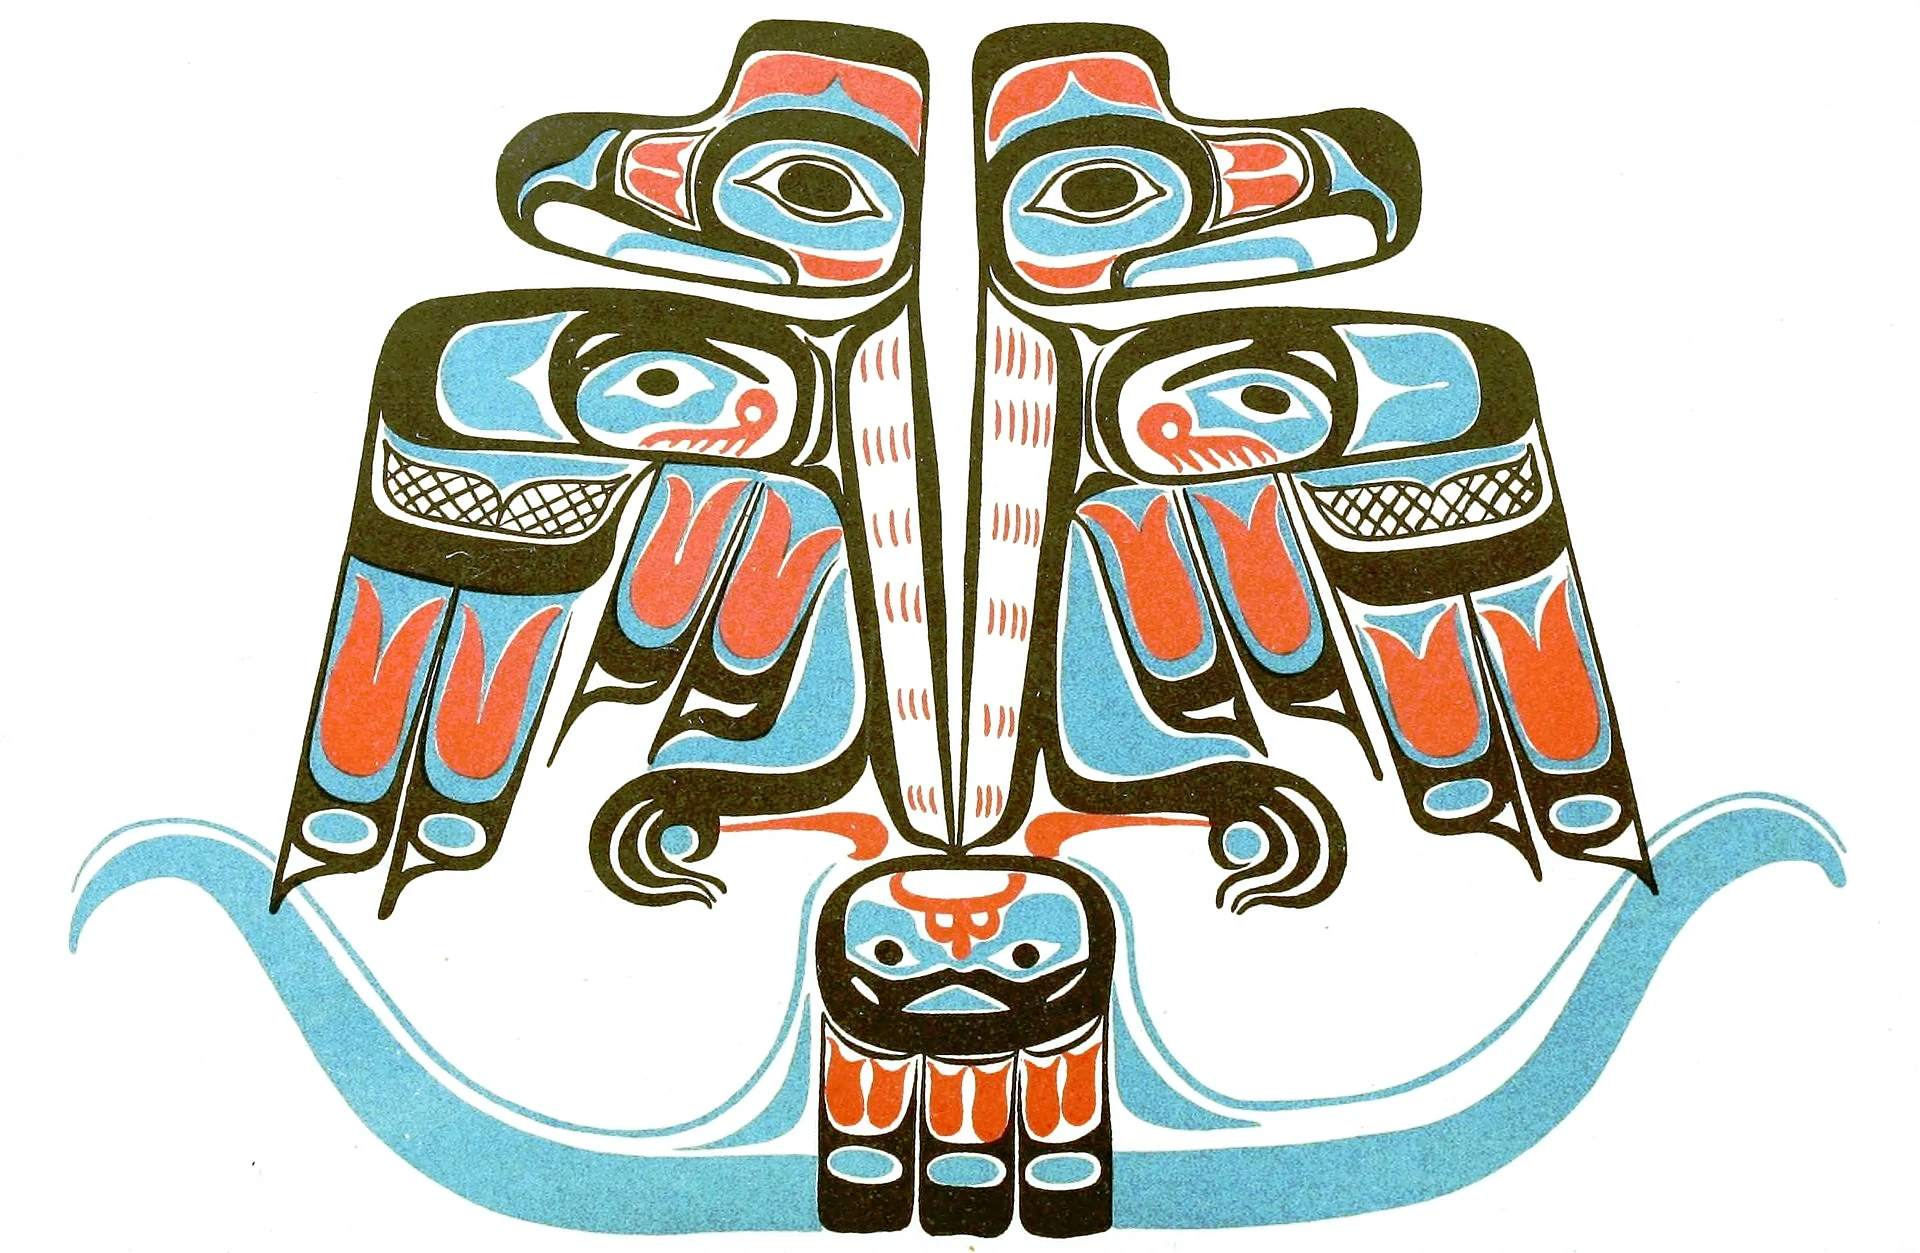 The digitized image of a double headed thunderbird drawn in an artistic style by Haida peoples.